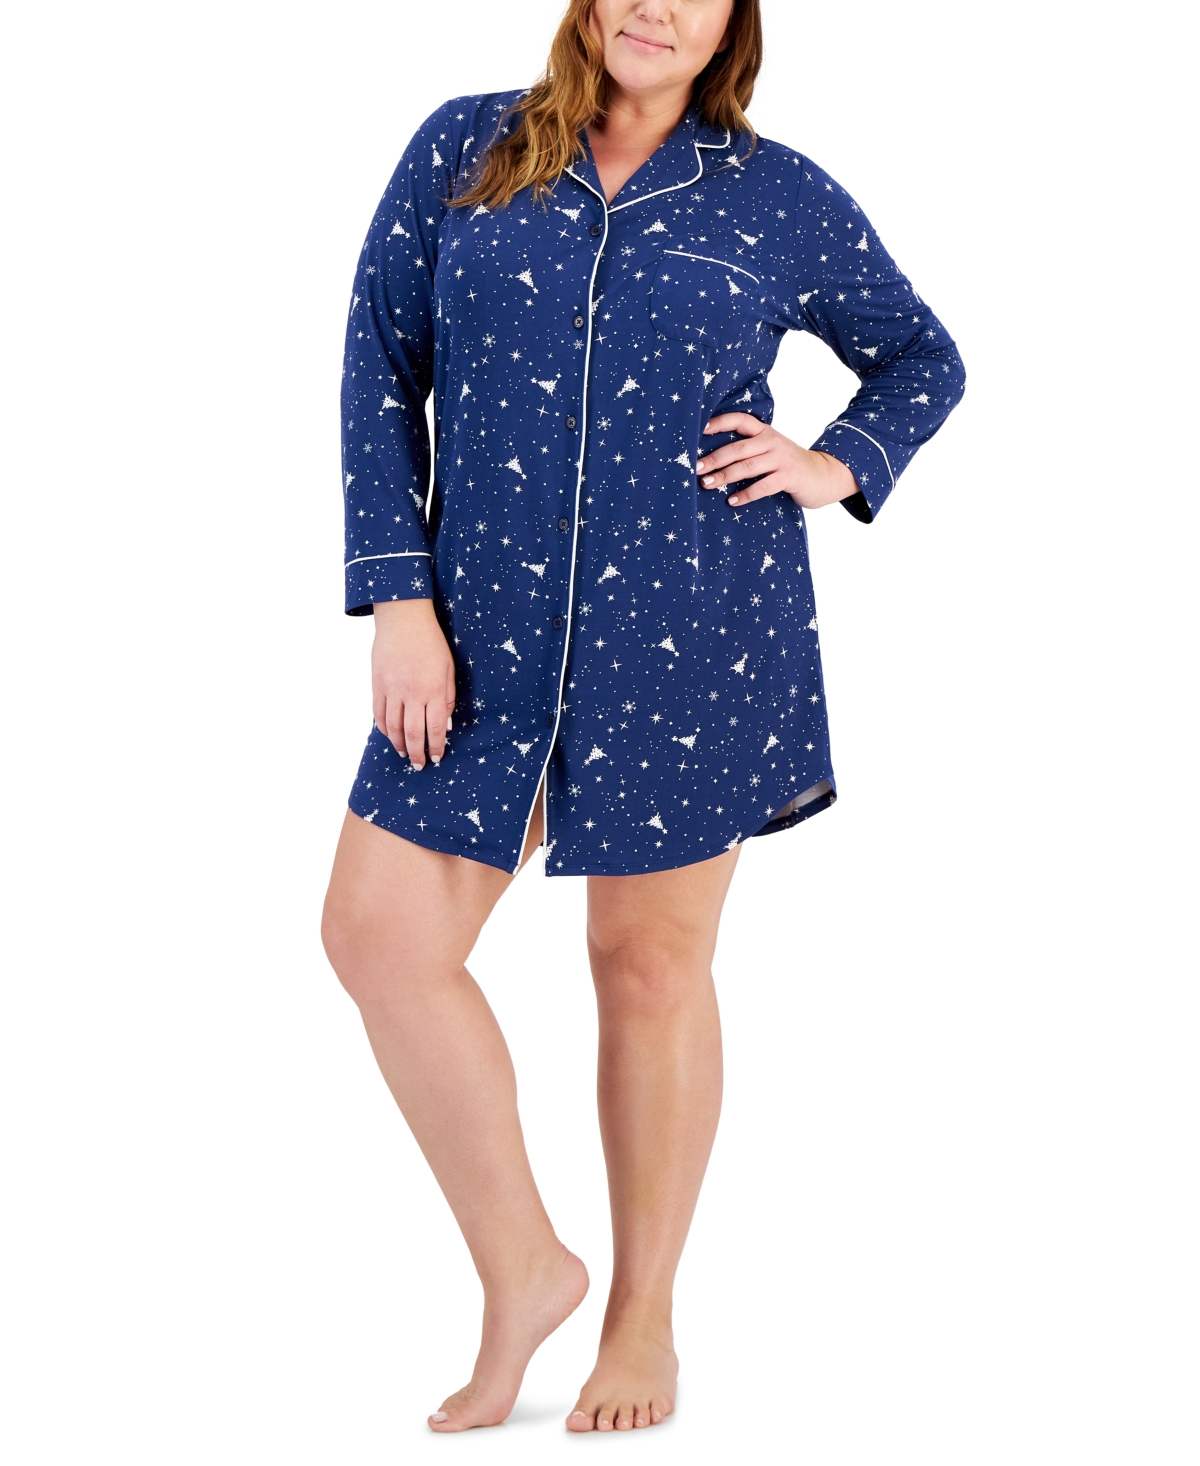 CHARTER CLUB PLUS SIZE GRAPHIC NOTCHED-COLLAR SLEEPSHIRT, CREATED FOR MACY'S